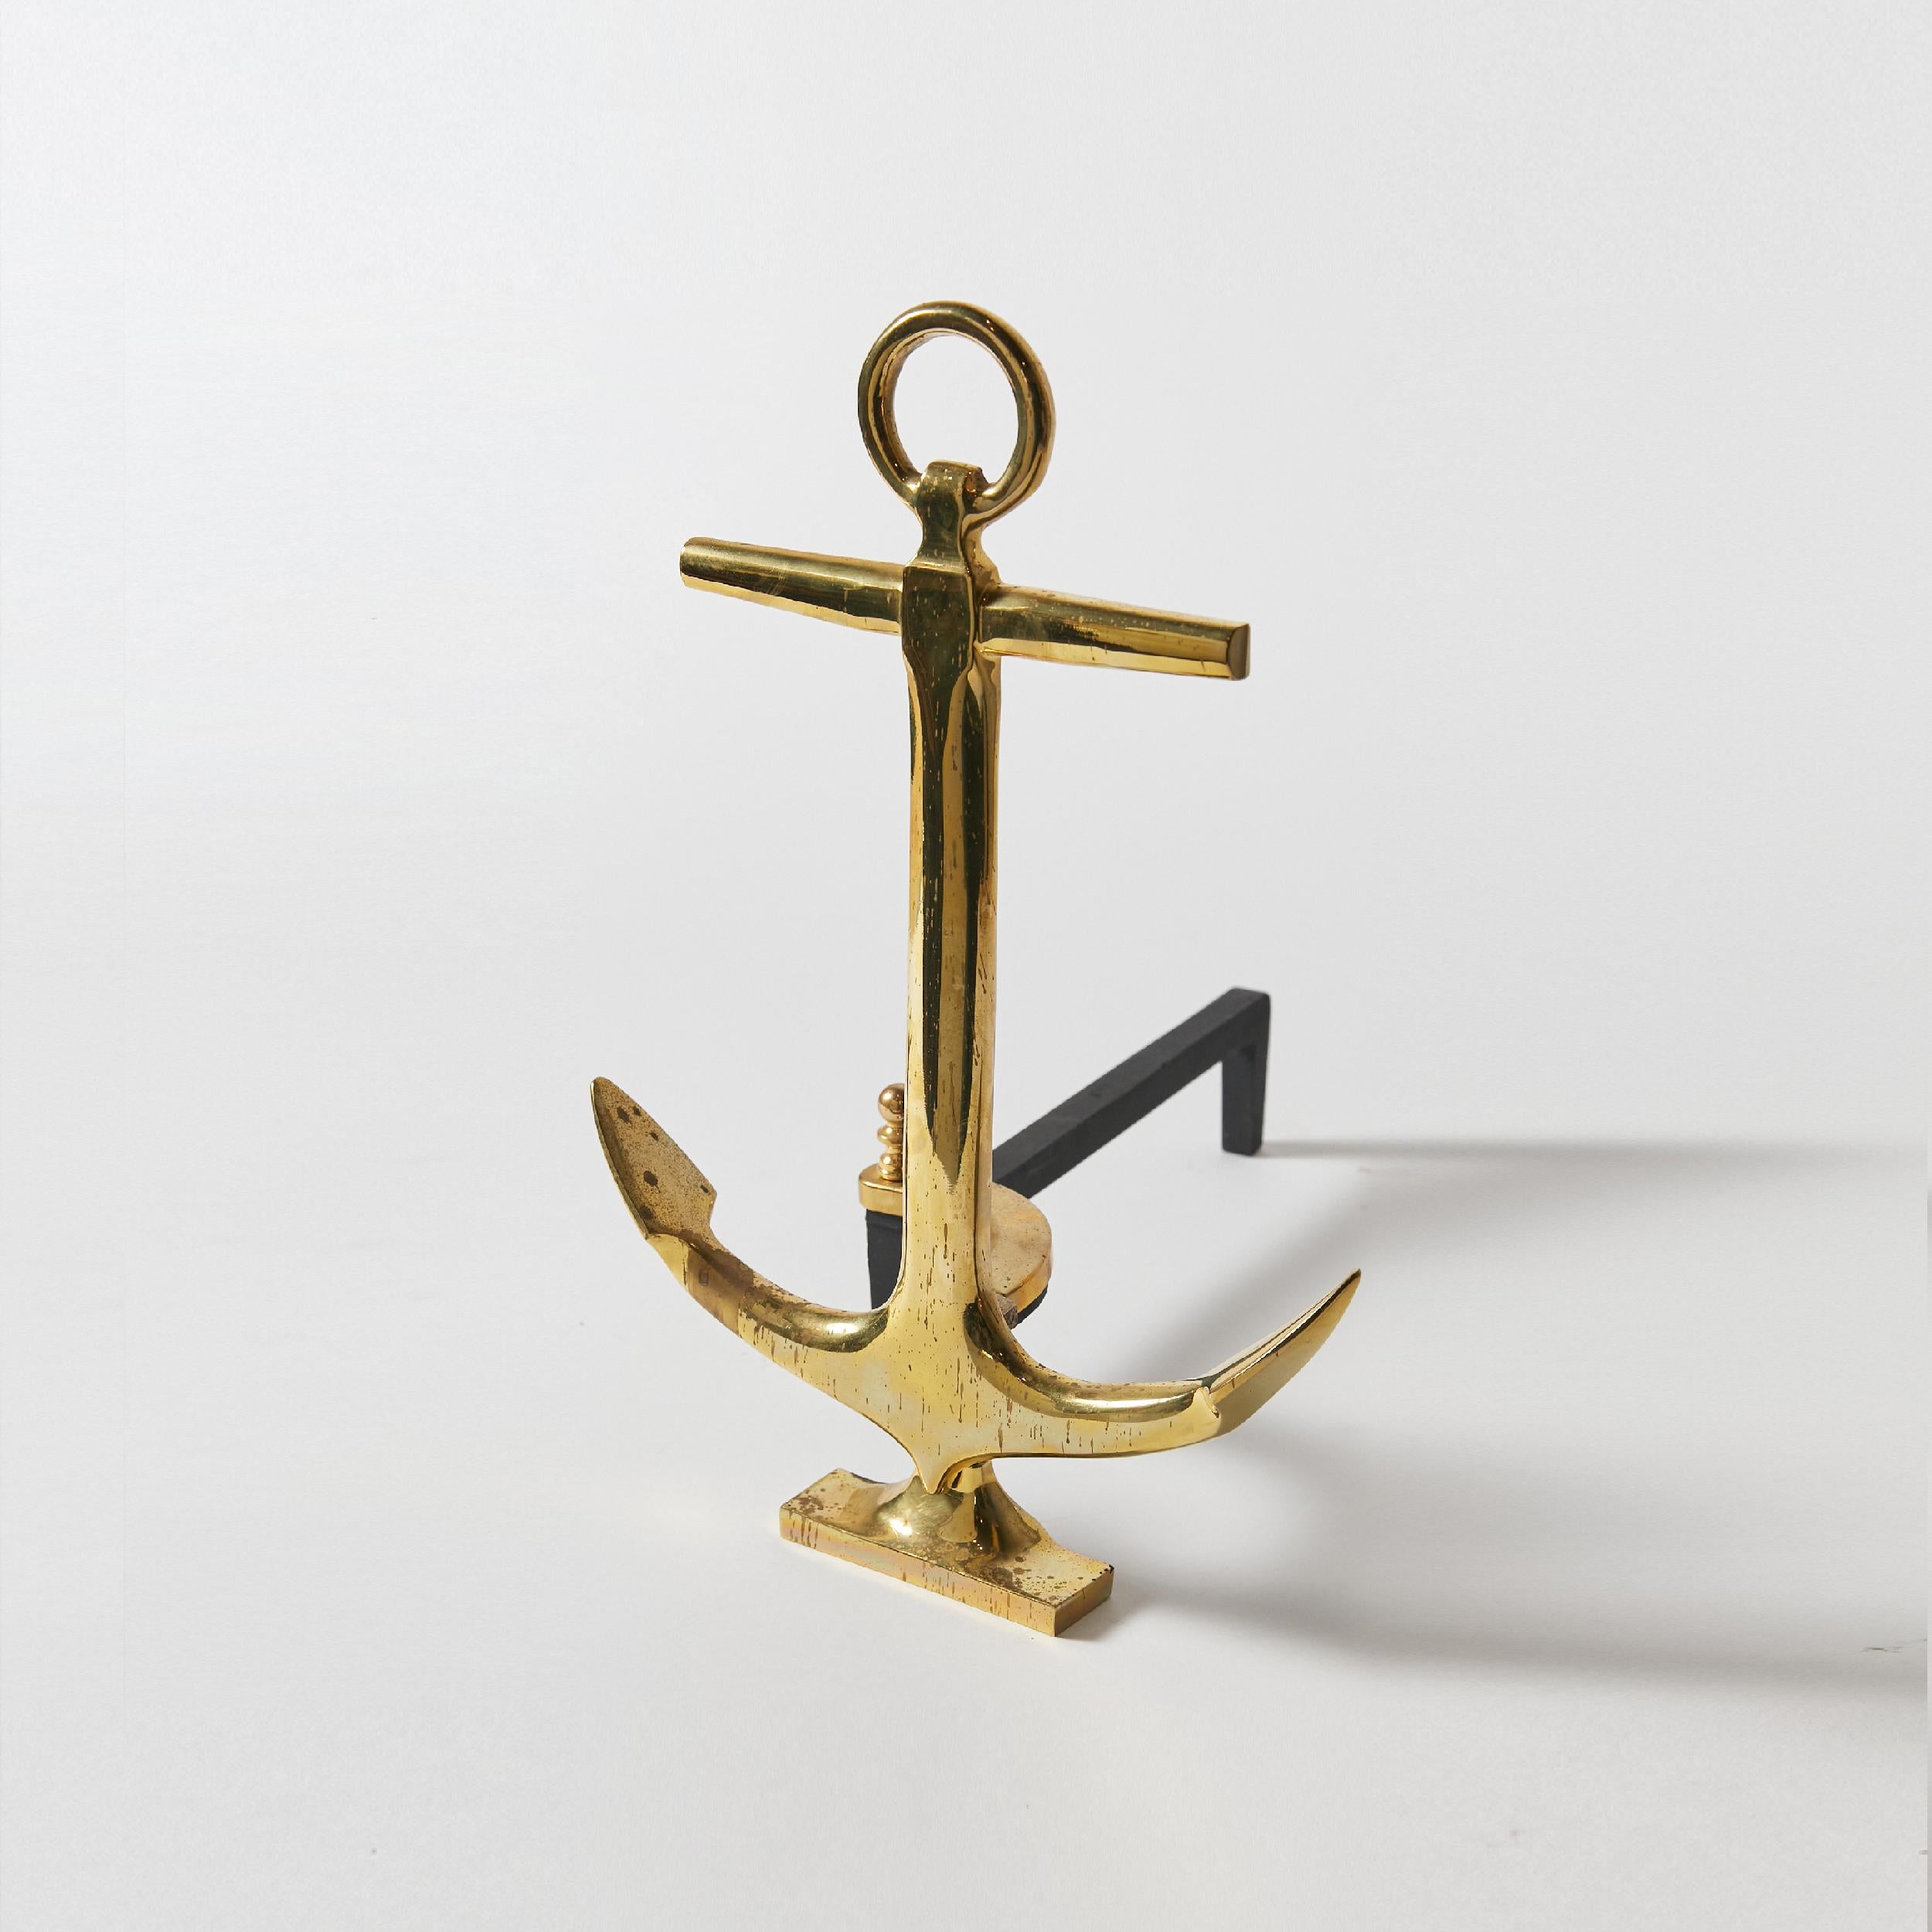 20th Century Pair of 1940 Anchor-Shaped Andirons in Polished Brass For Sale